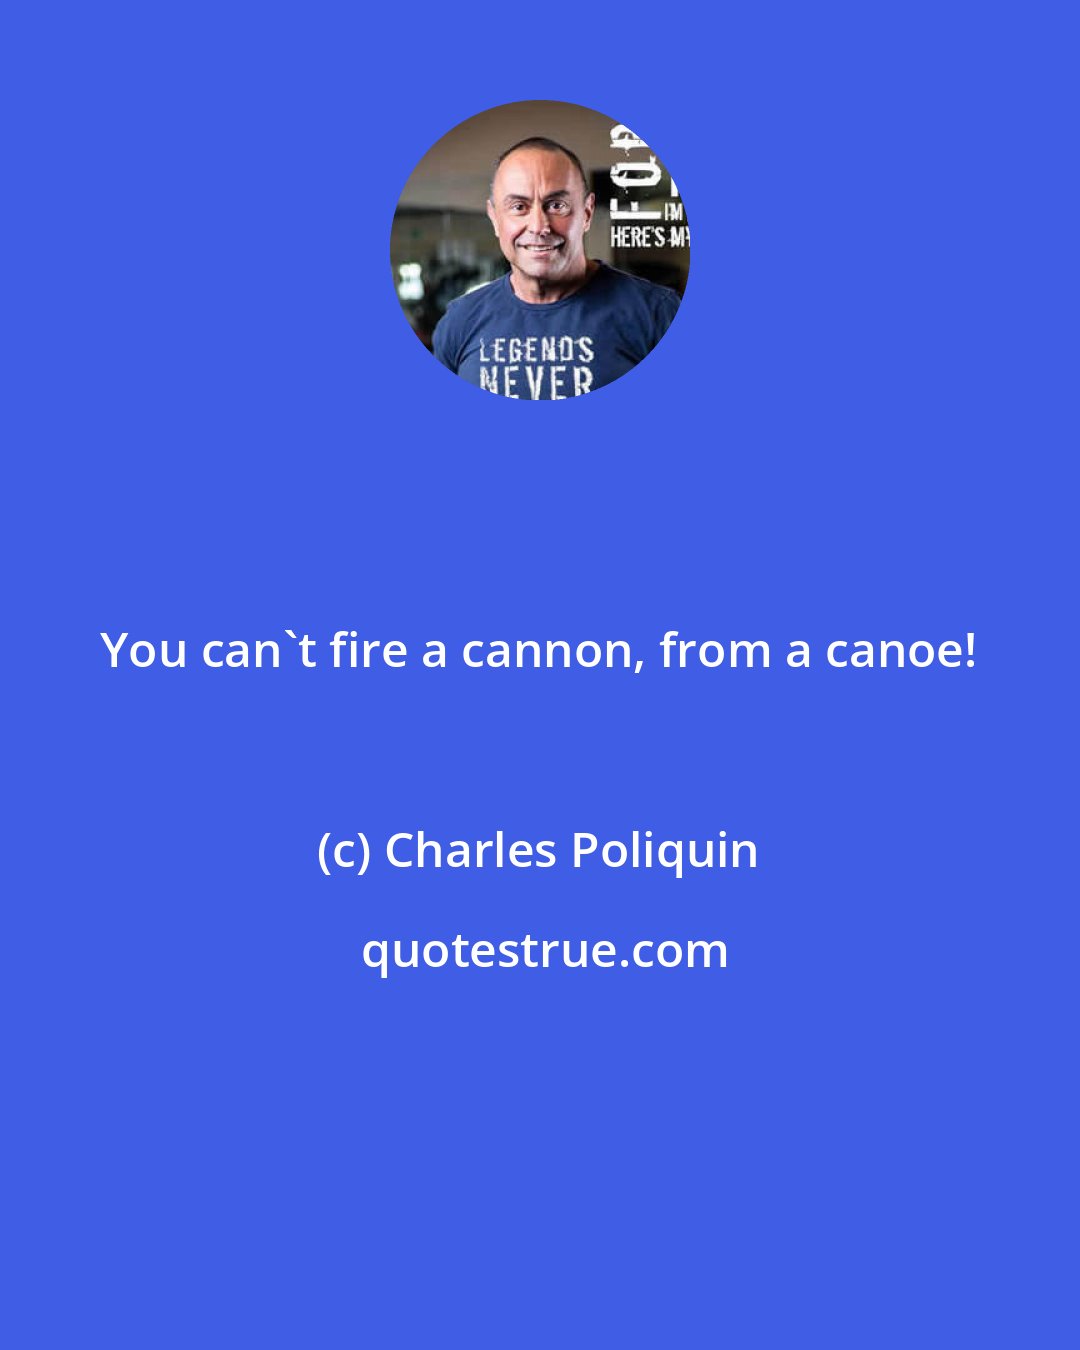 Charles Poliquin: You can't fire a cannon, from a canoe!